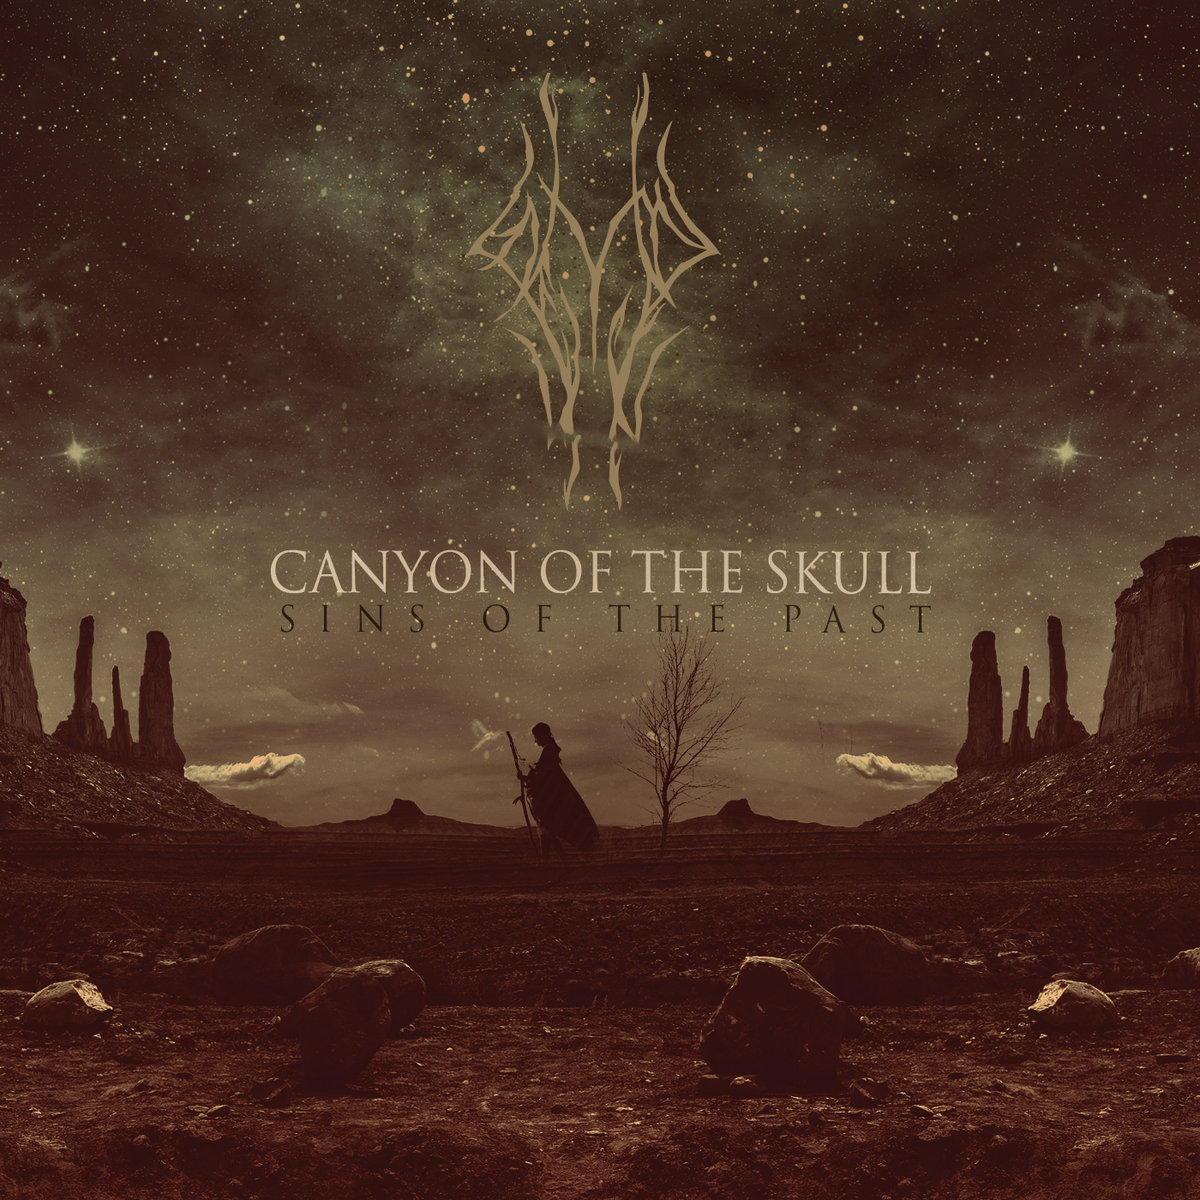 Canyon Of The Skull - Sins Of The Past (2019)